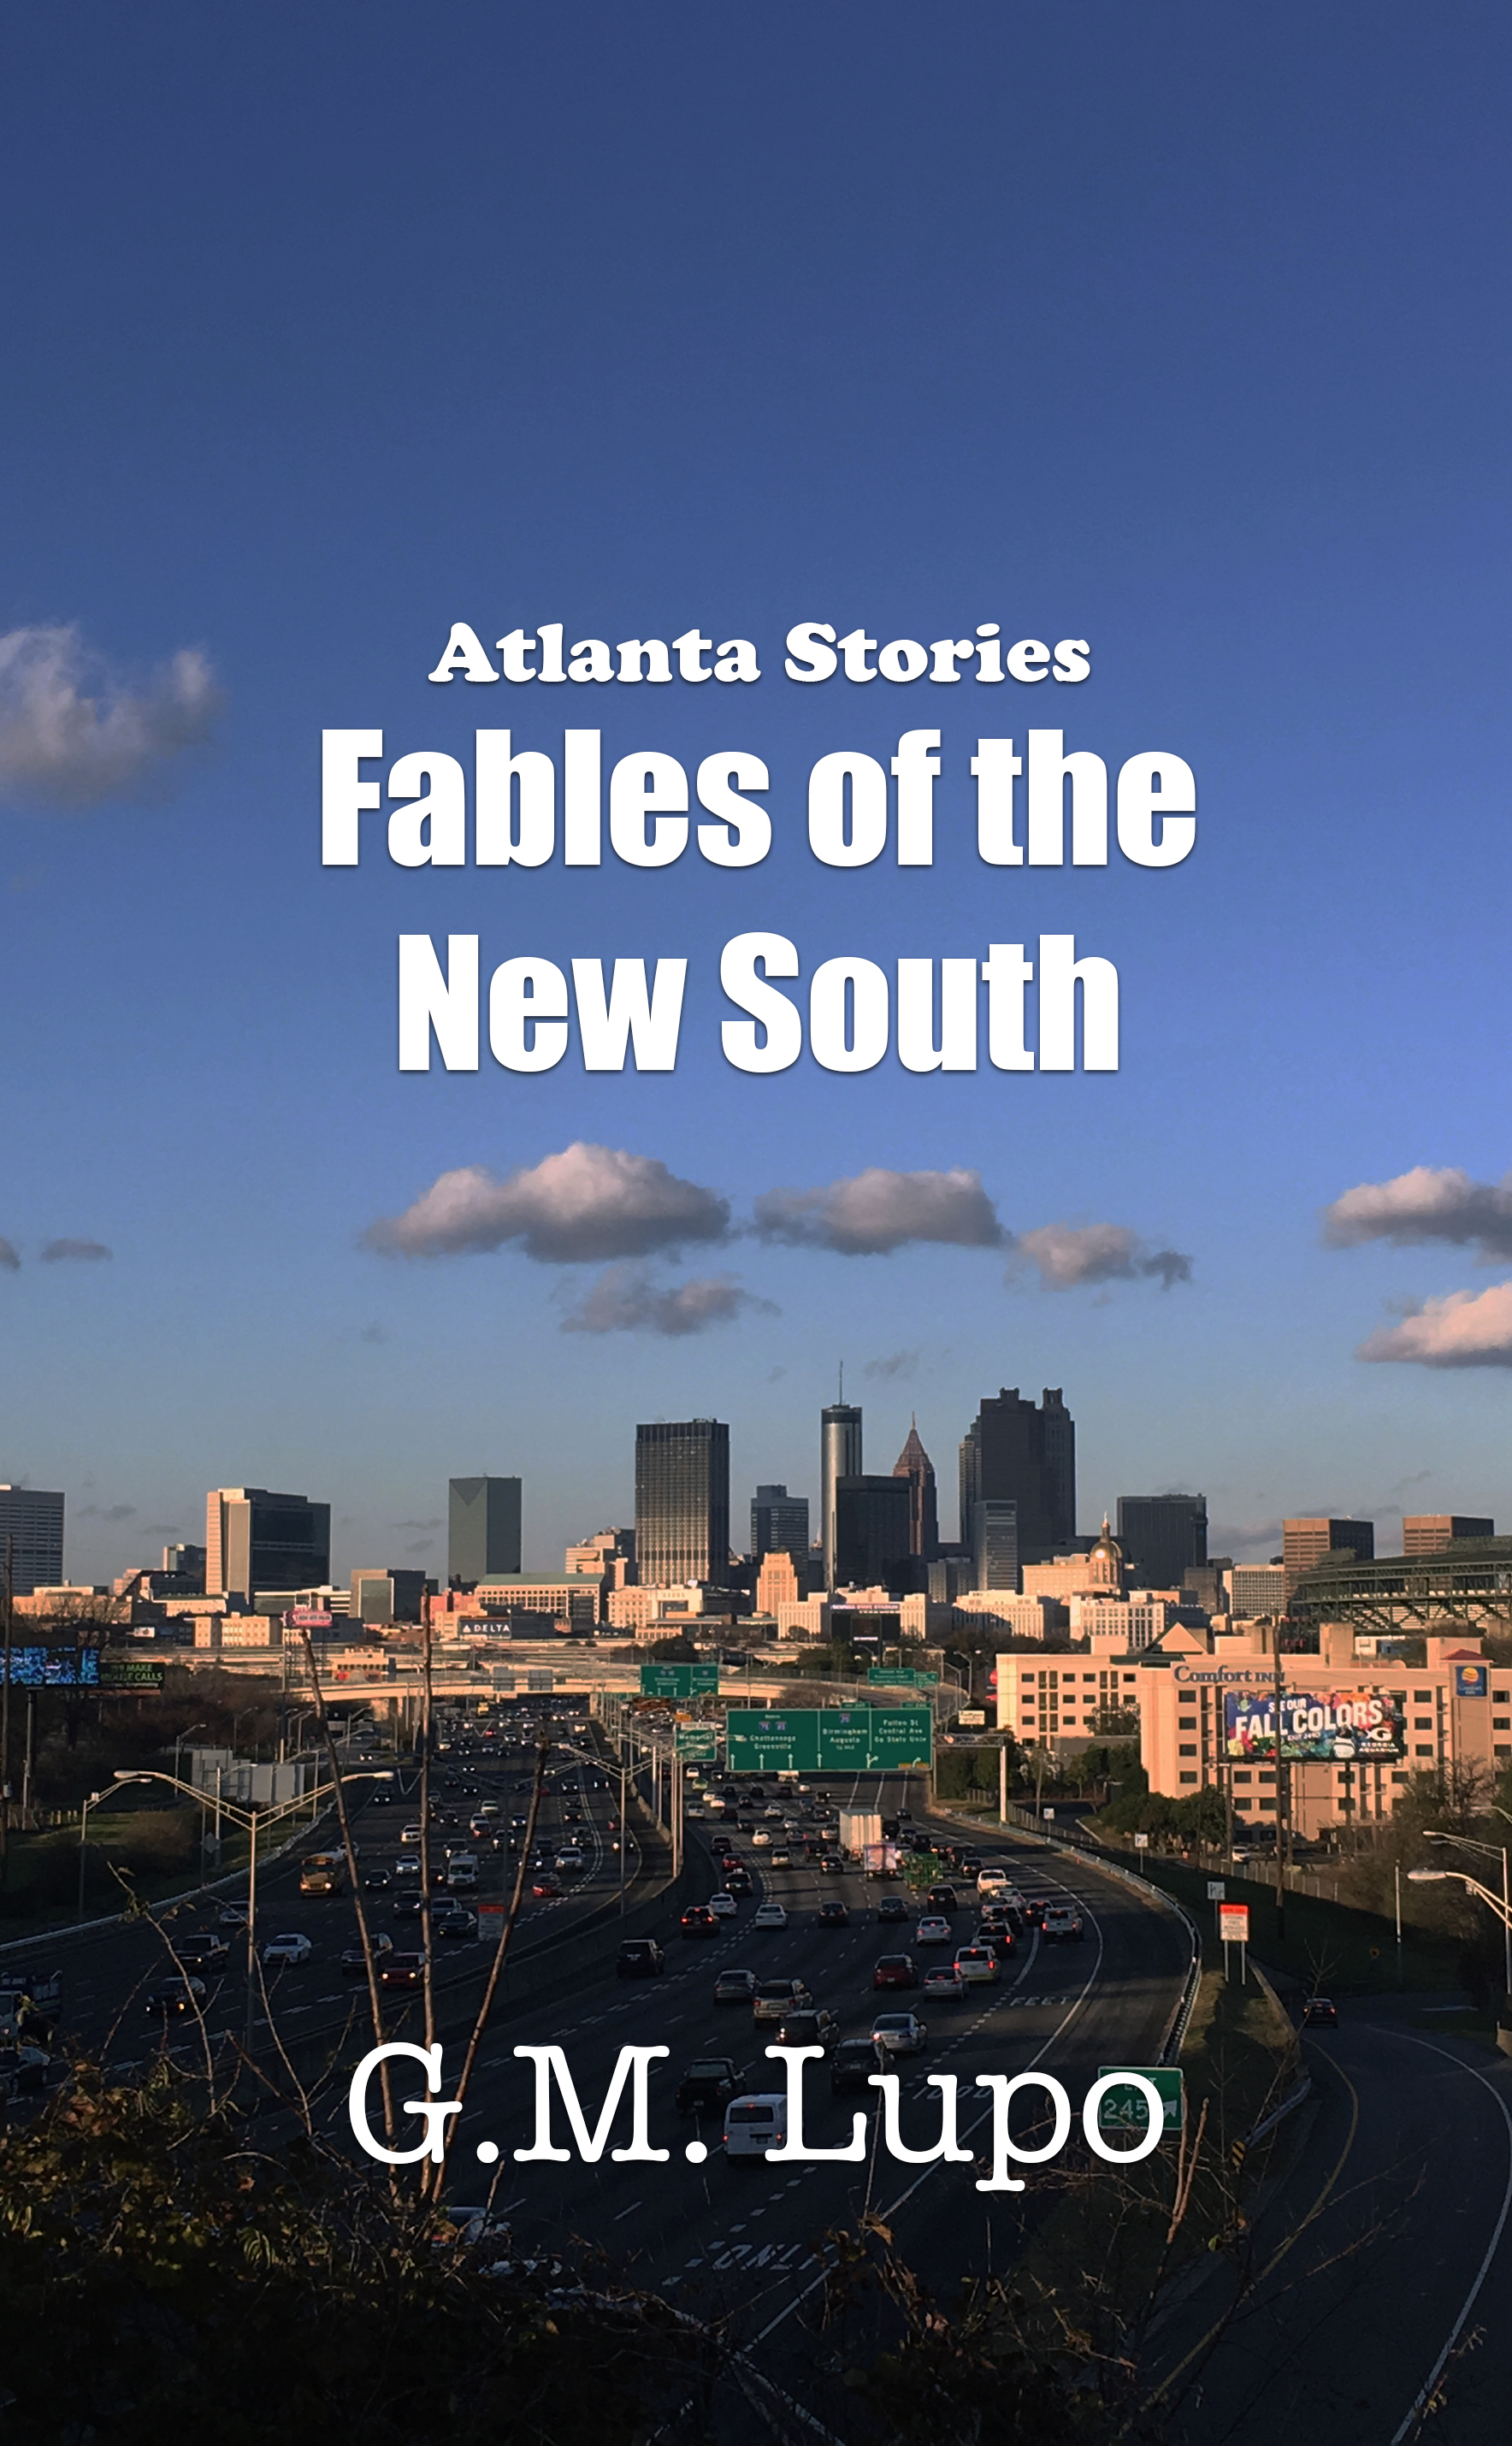 Fables of the New South